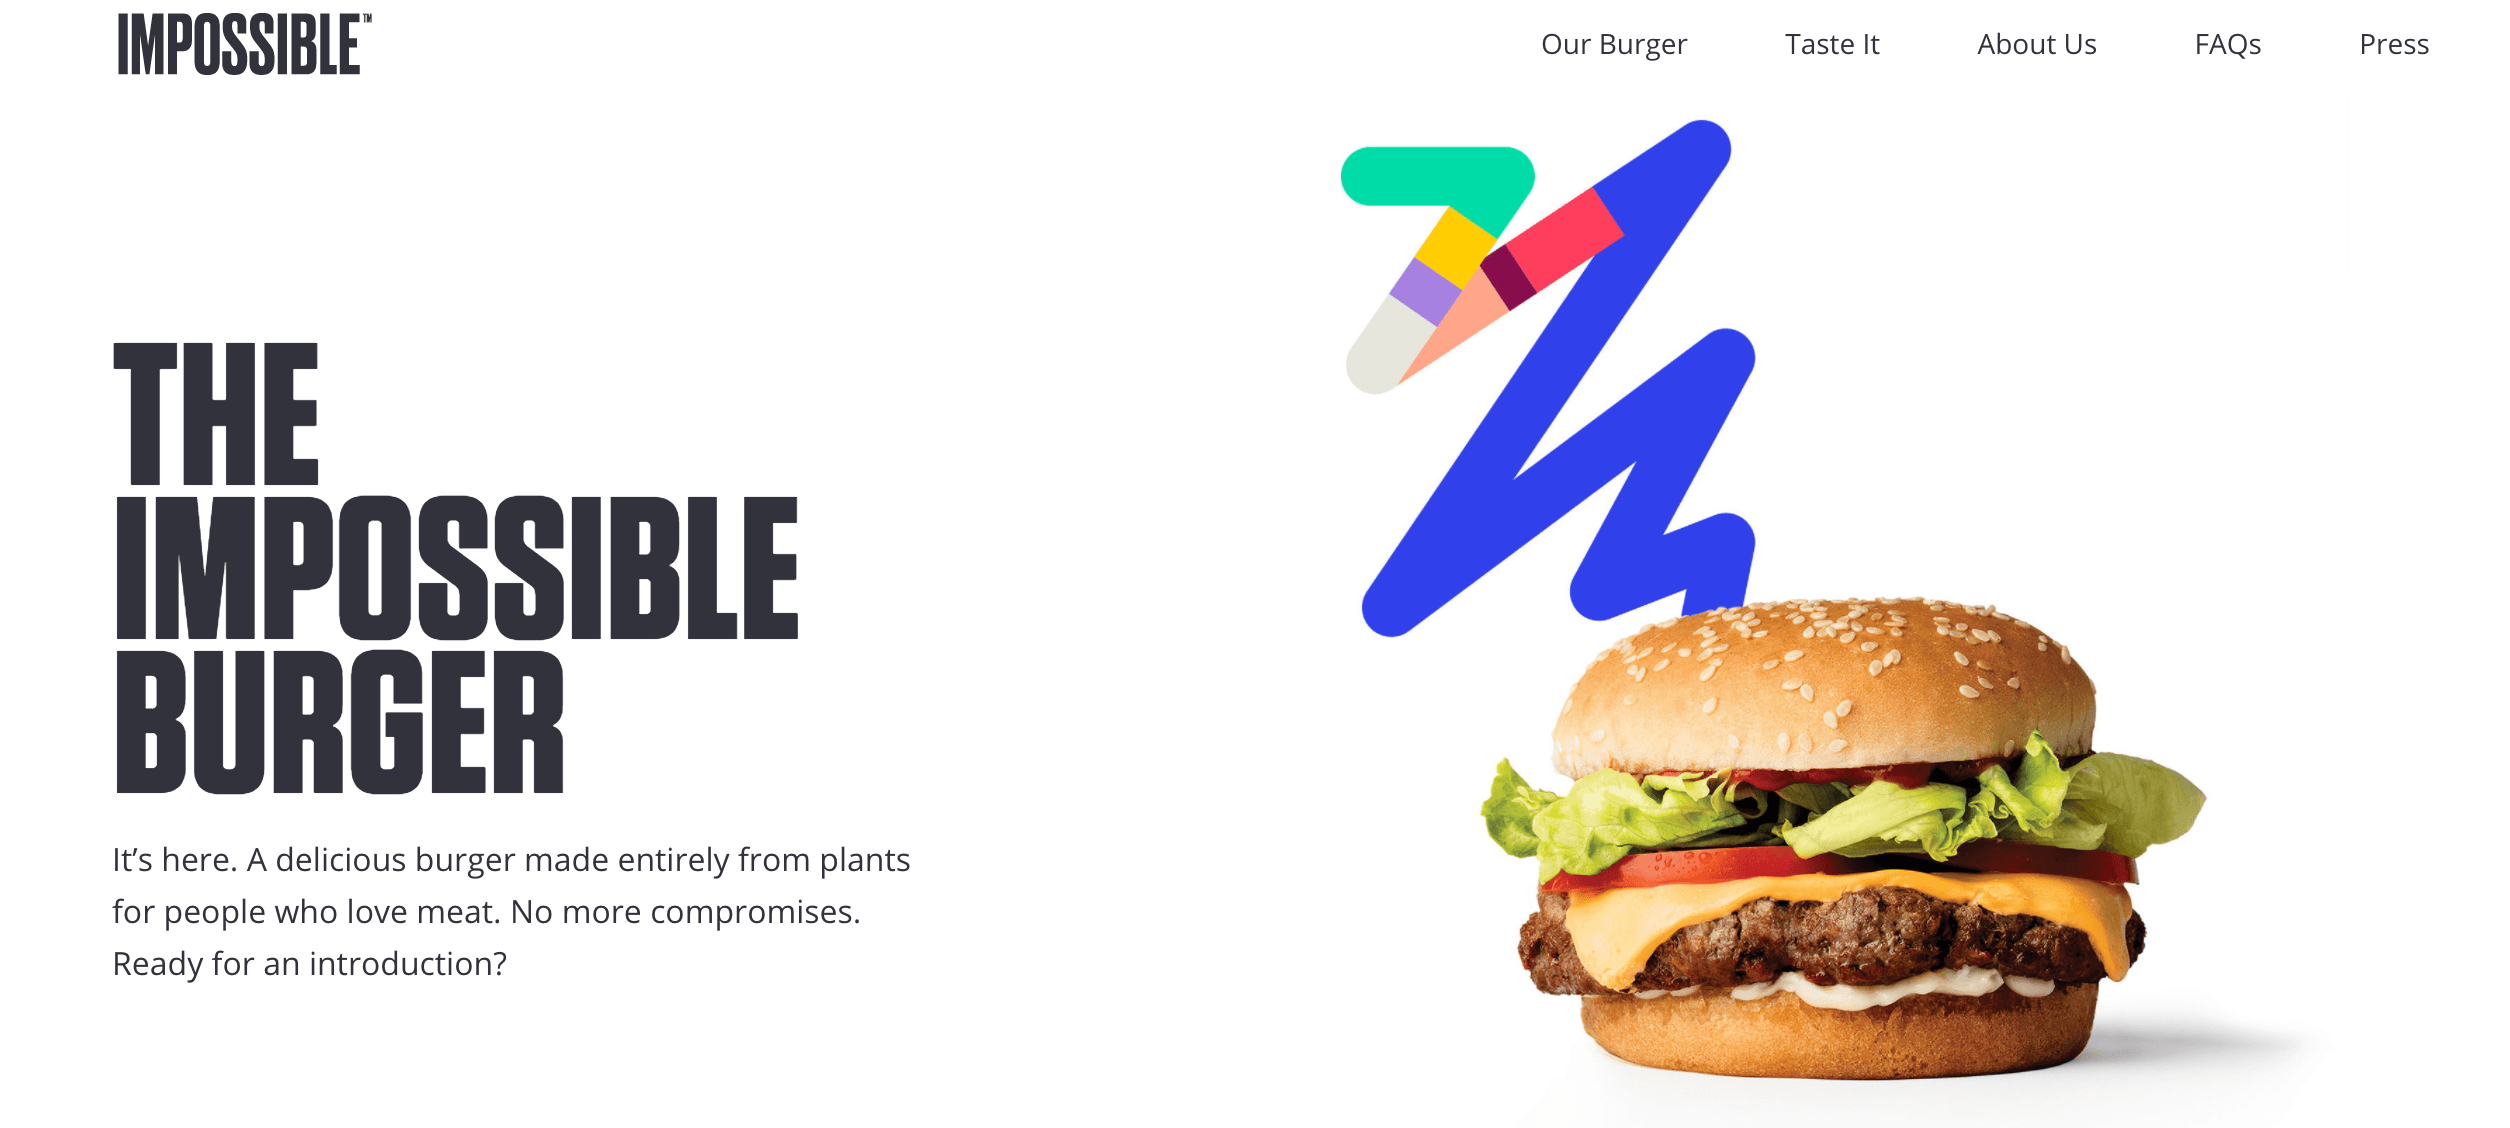 ipo stock of impossible foods